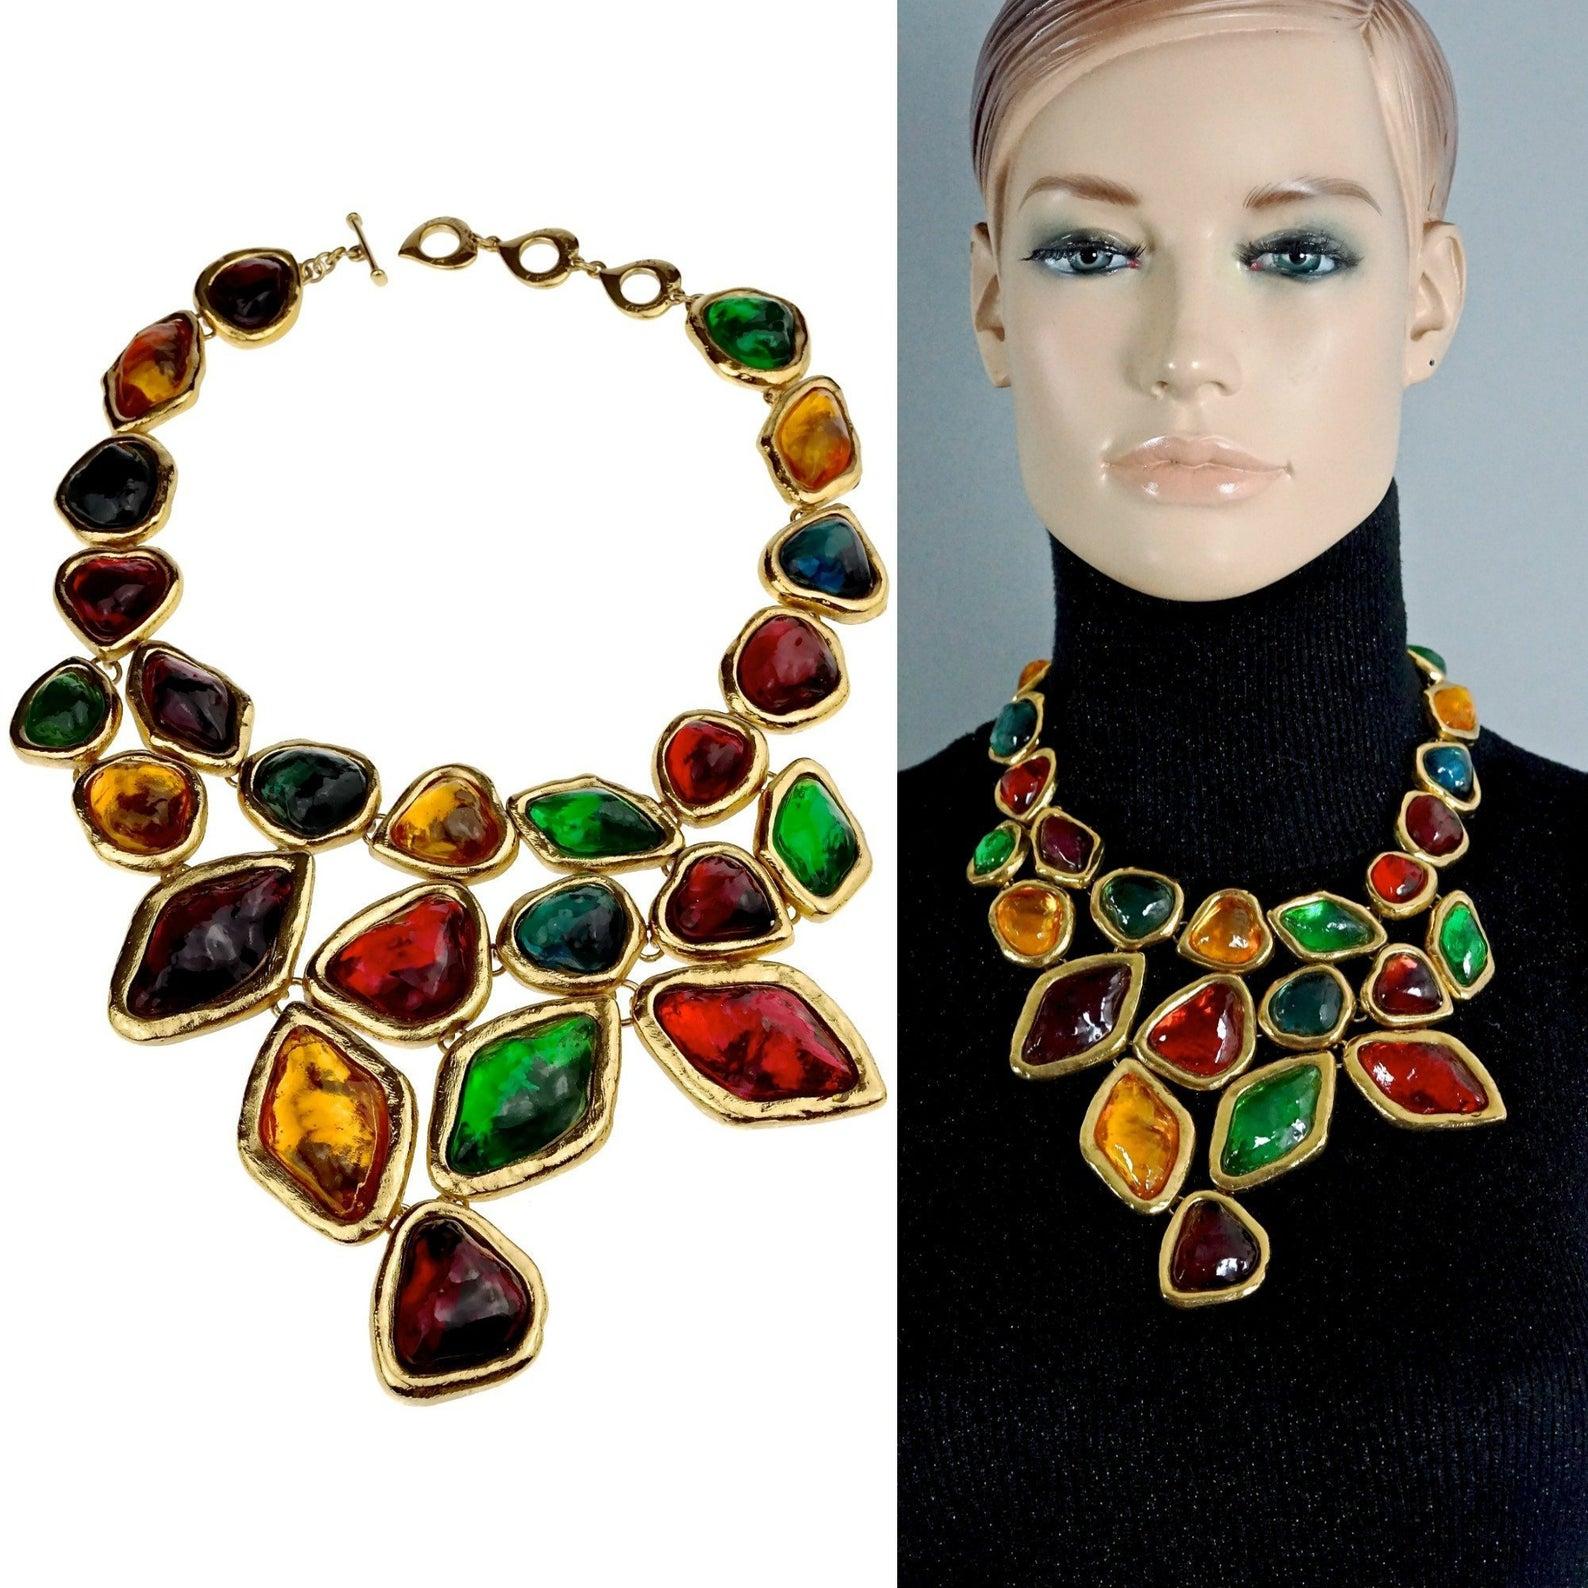 Features:
- 100% Authentic YVES SAINT LAURENT by Robert Goossens.
- Vibrant multi colour poured resin stones and cabochons set on gold tone metal.
- Glass stones are in shapes of Oval, Square, Pear, Round, Marquise with huge Octagon center piece!
-